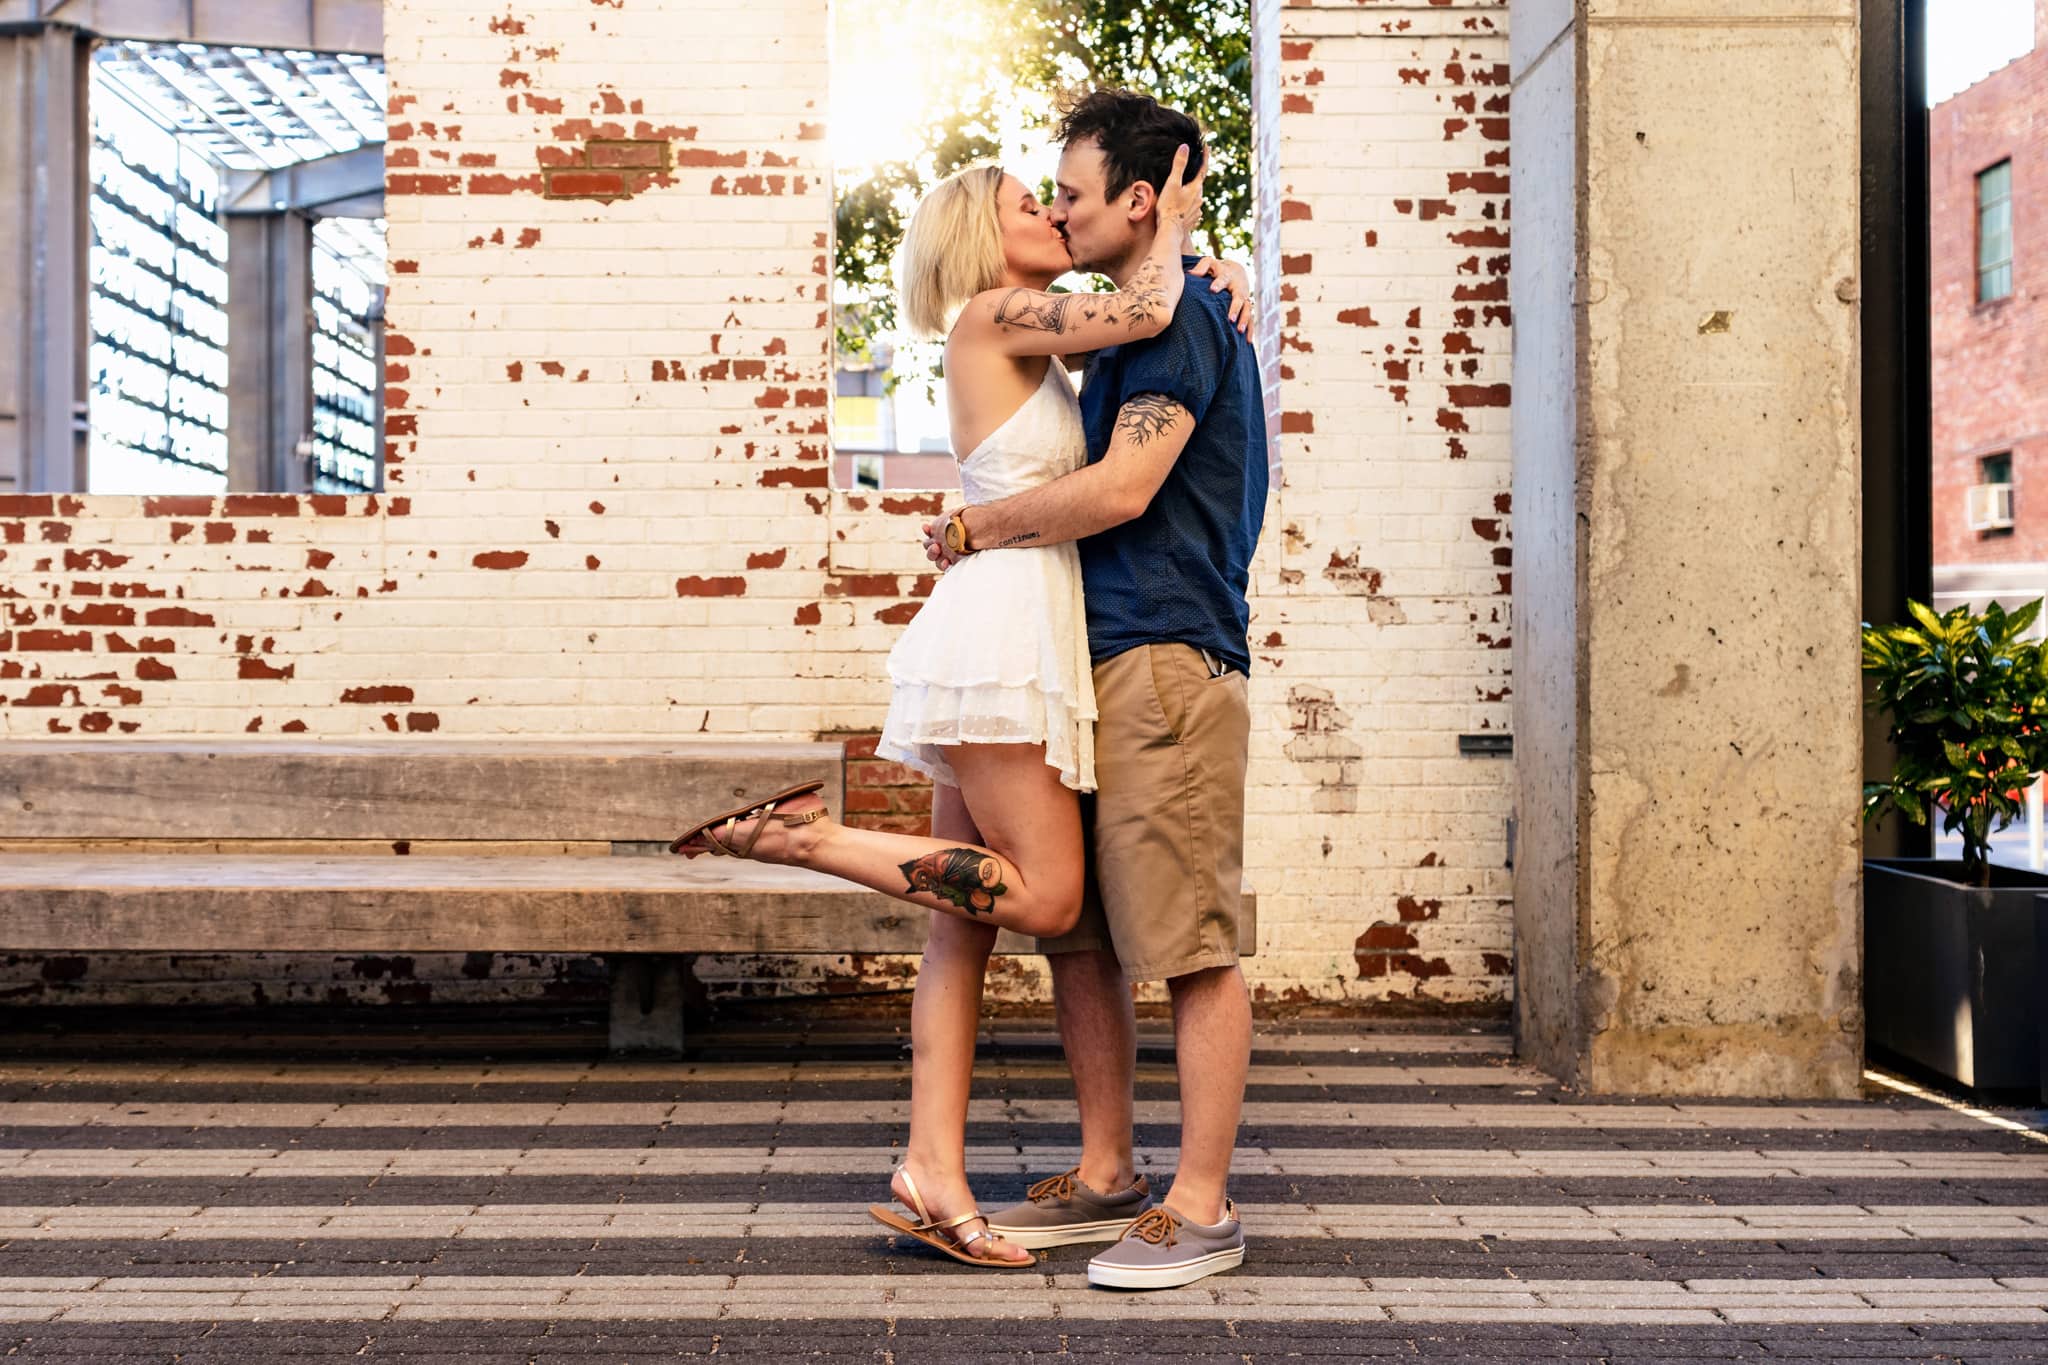 Downtown Raleigh warehouse district is a great engagement photo location | photos by Kivus & Camera